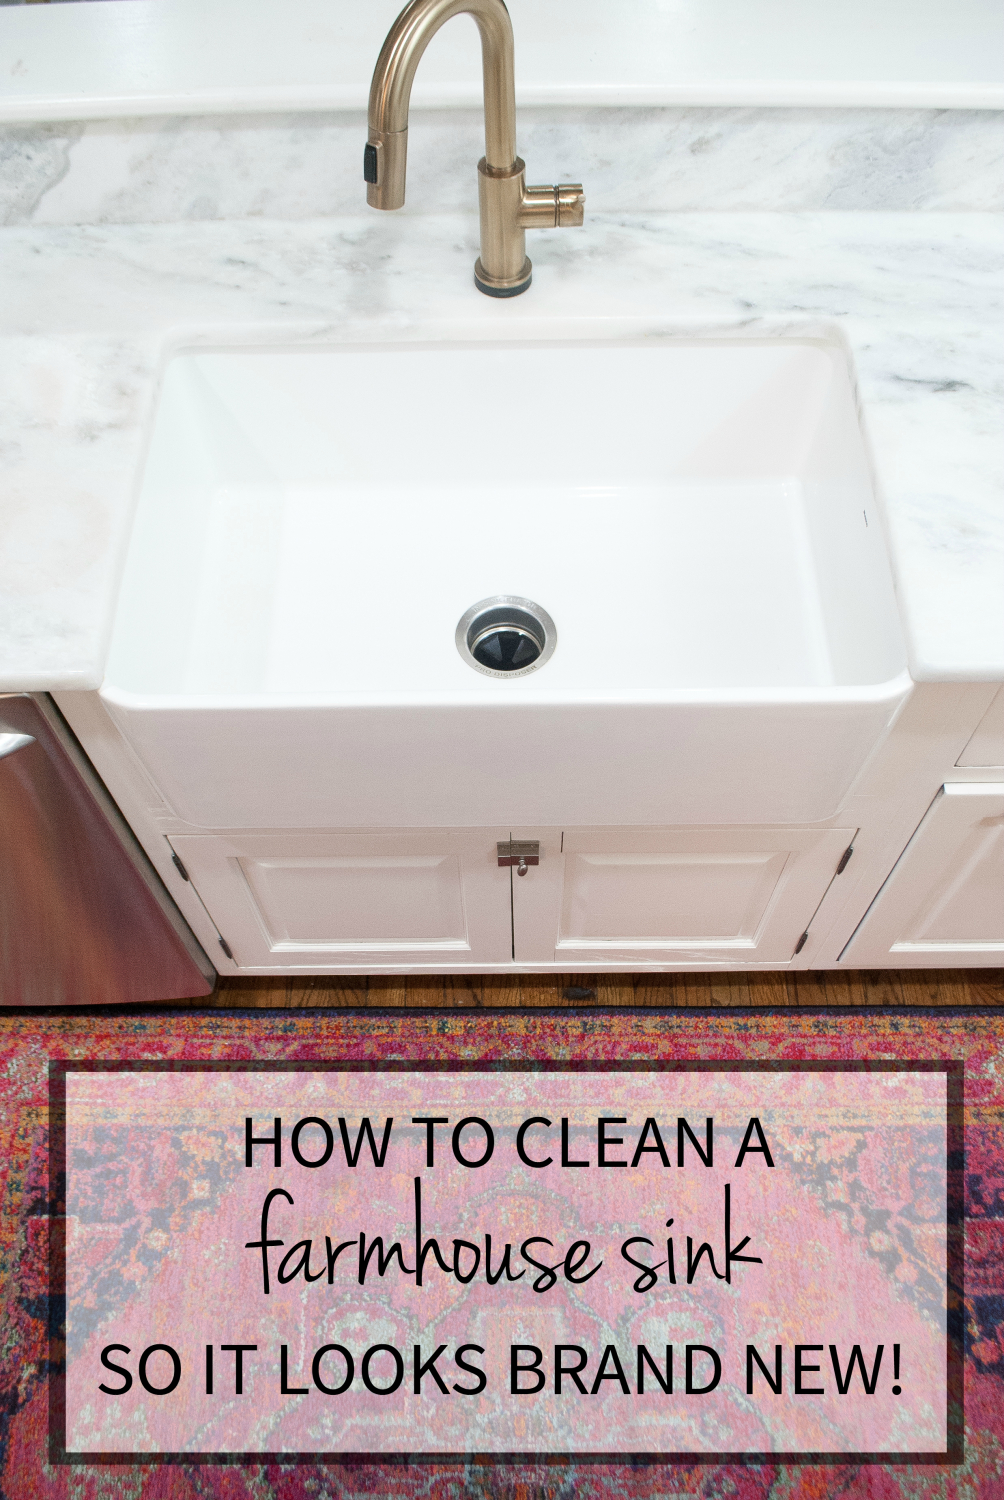 How to clean a farmhouse sink so it looks brand new, in about a minute!